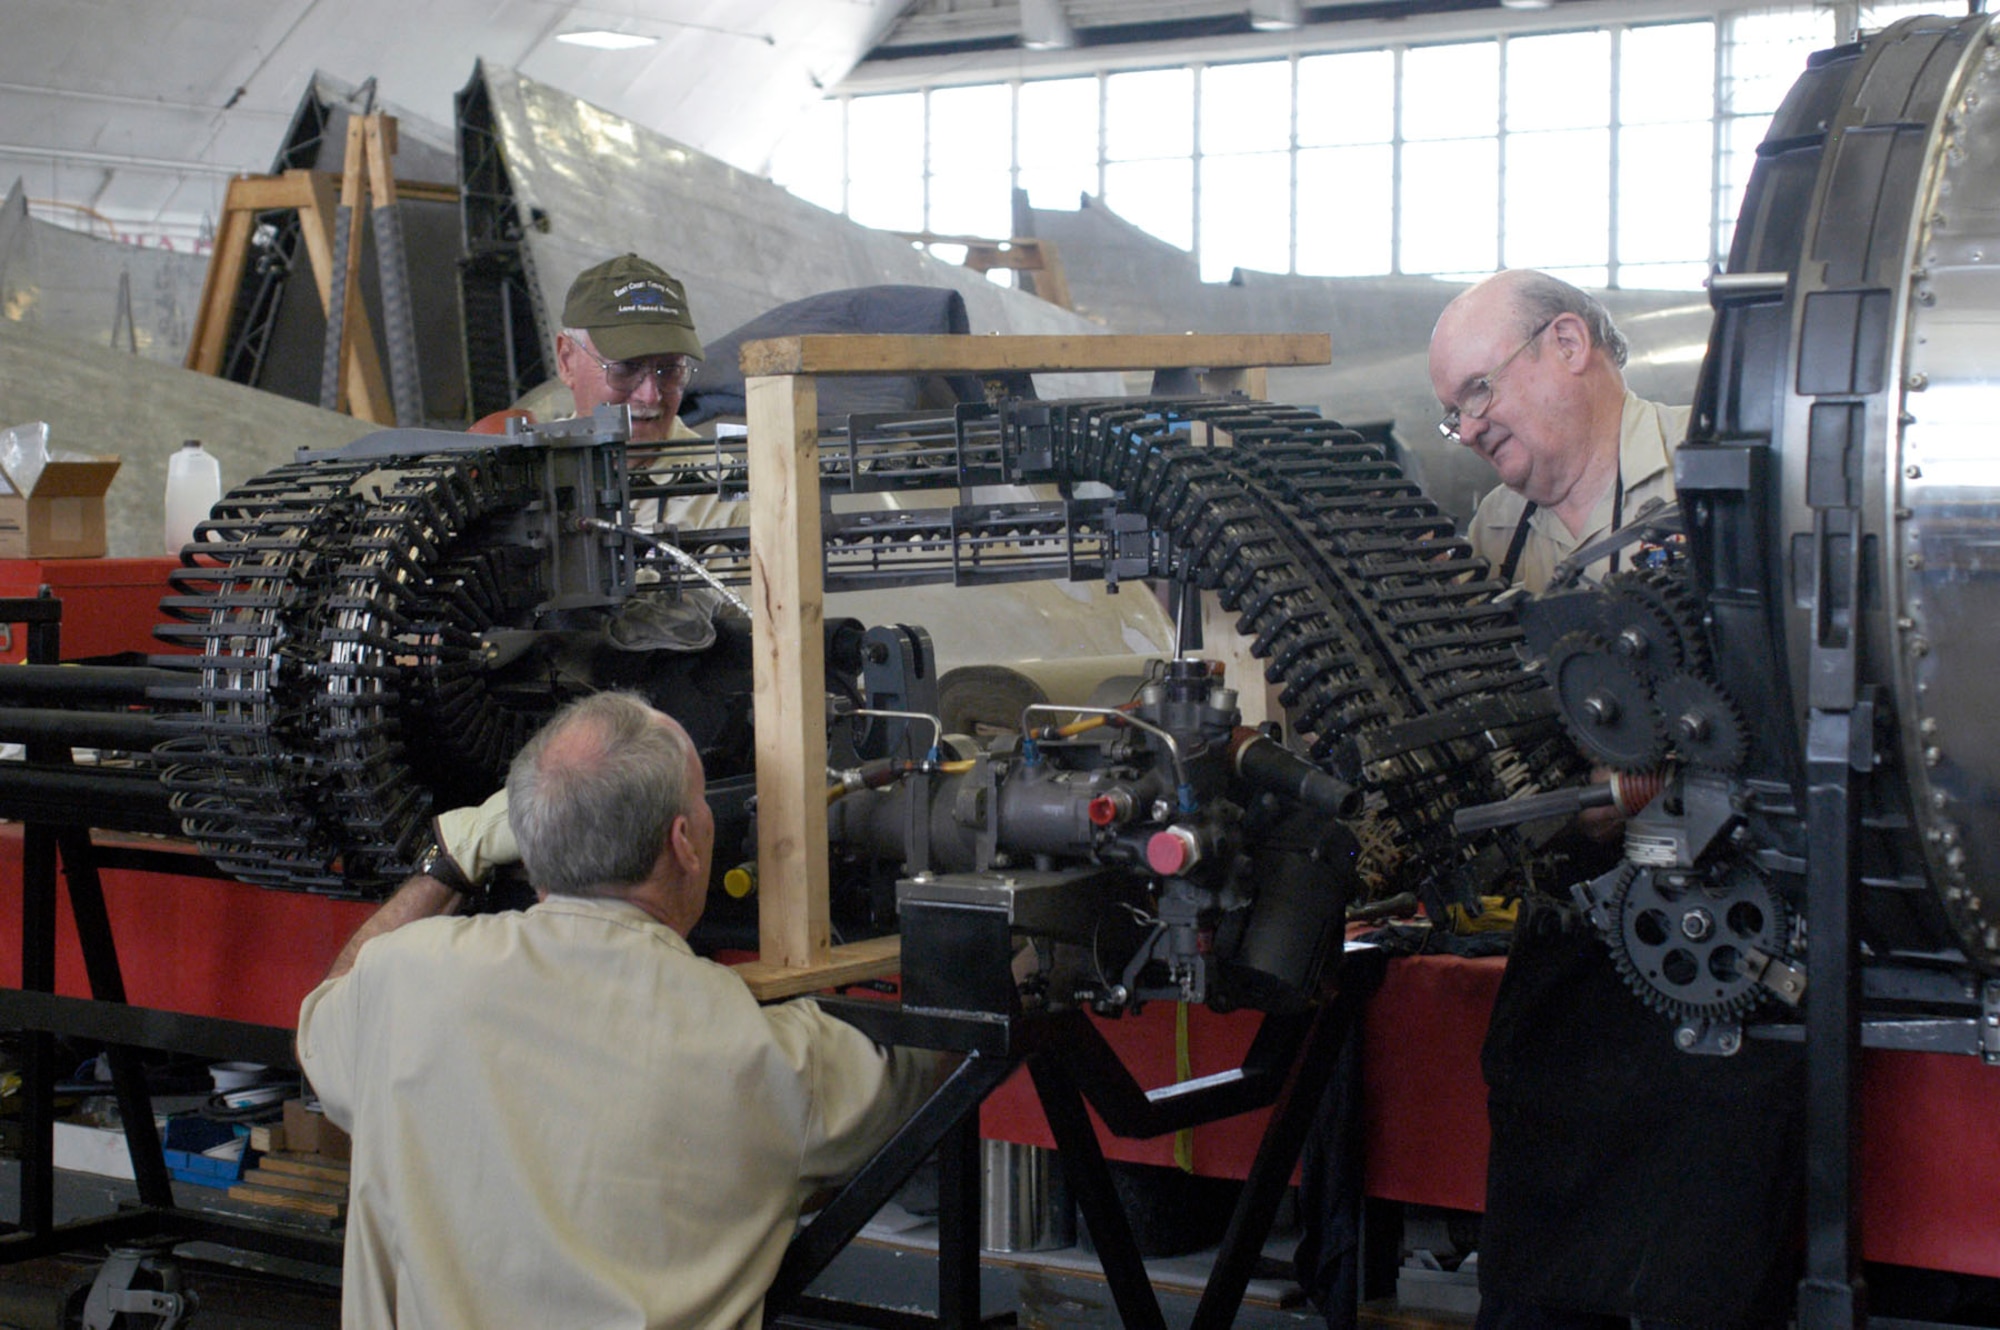 Restoration volunteers (from left to right) Ed Kienle, Garry Guthrie and Lou Thole load cartridges into the GAU-8/A drum. (U.S. Air Force photo)